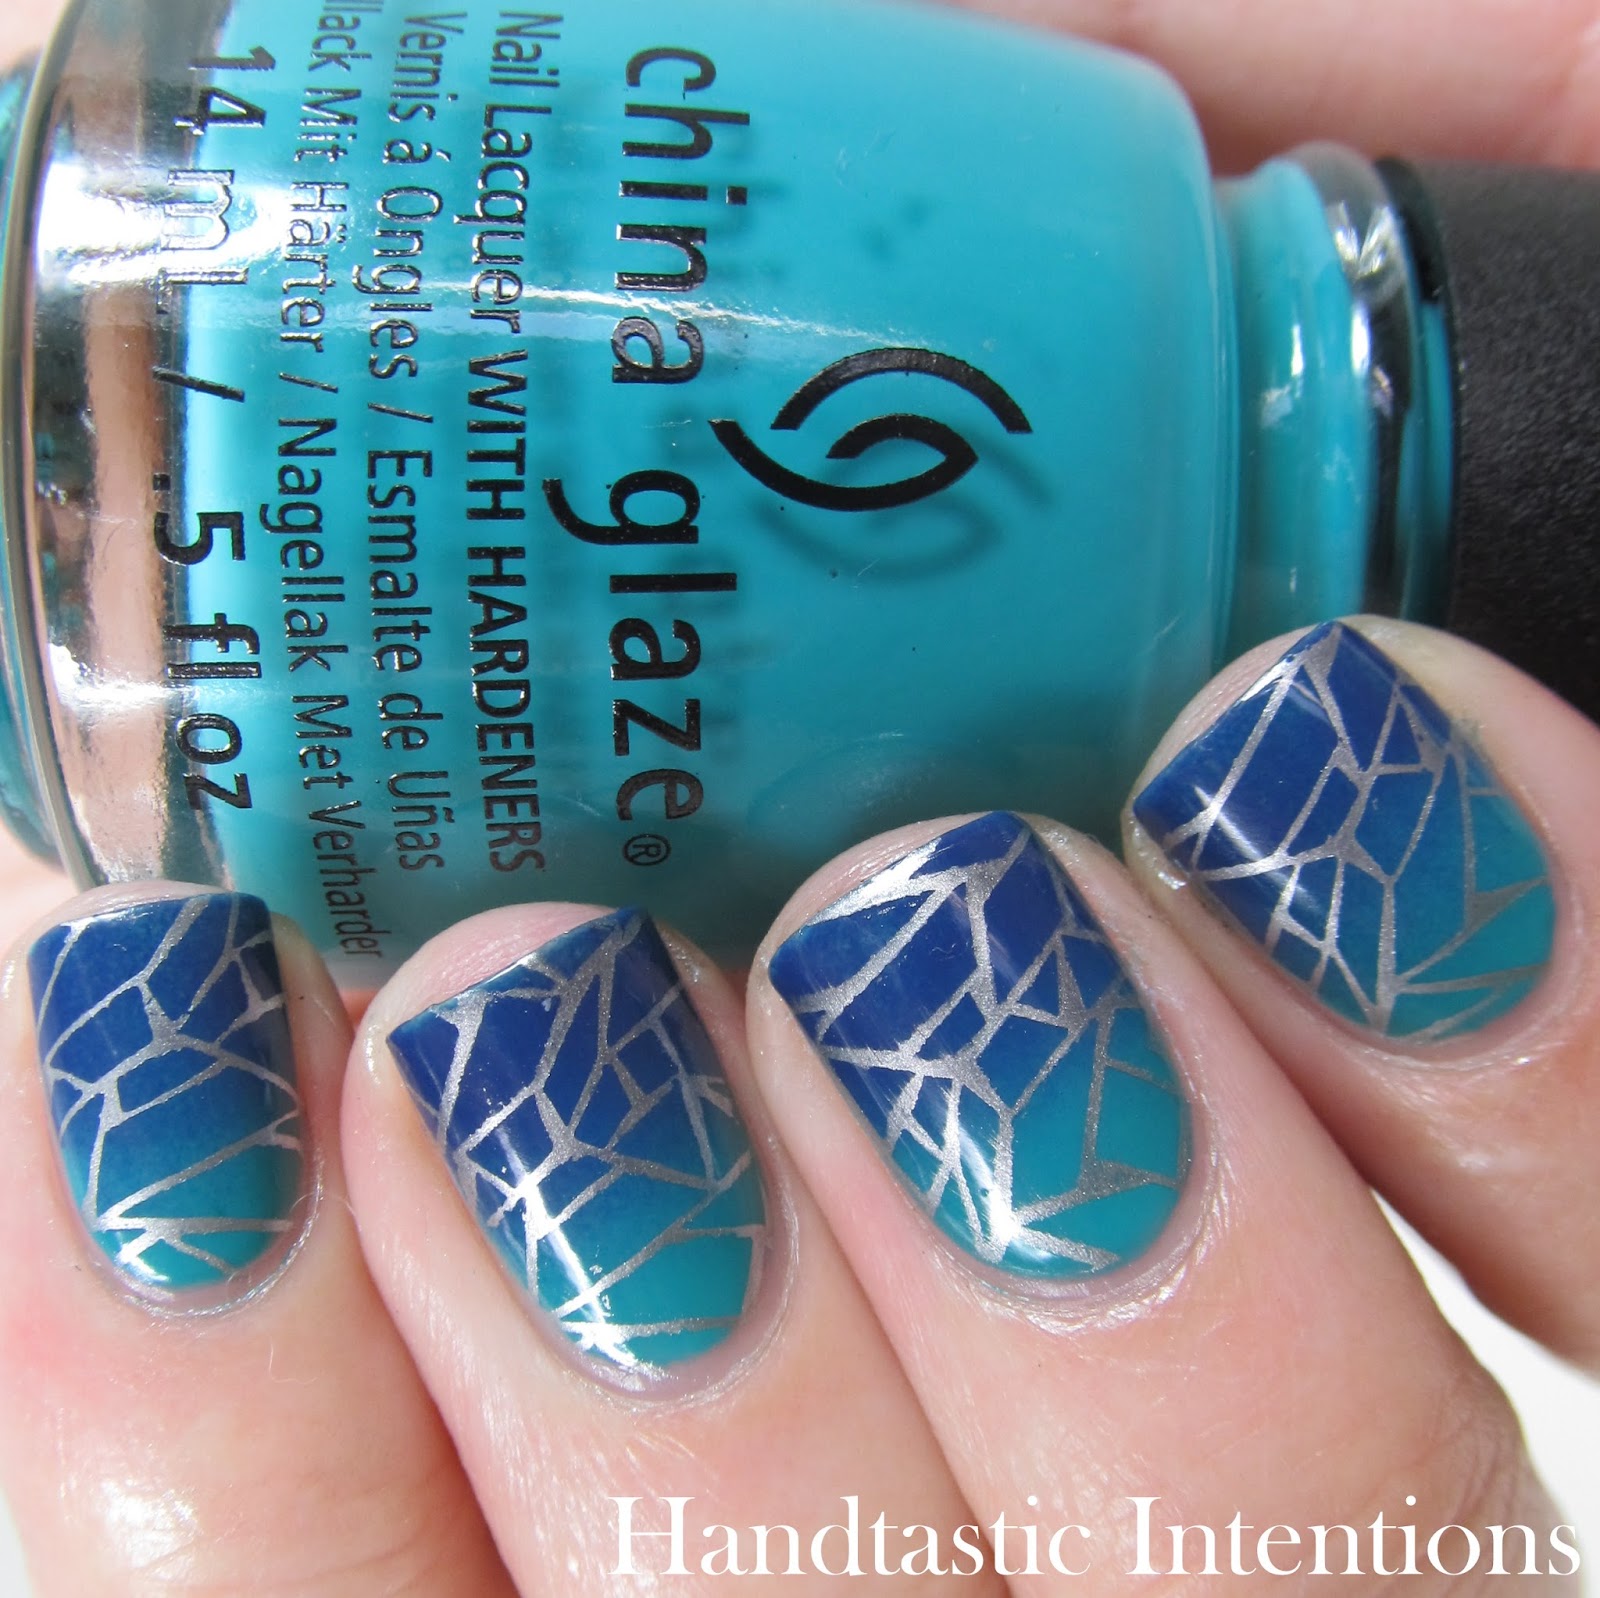 Handtastic Intentions: The Polished Bookworms: Nail Art Inspired by ...